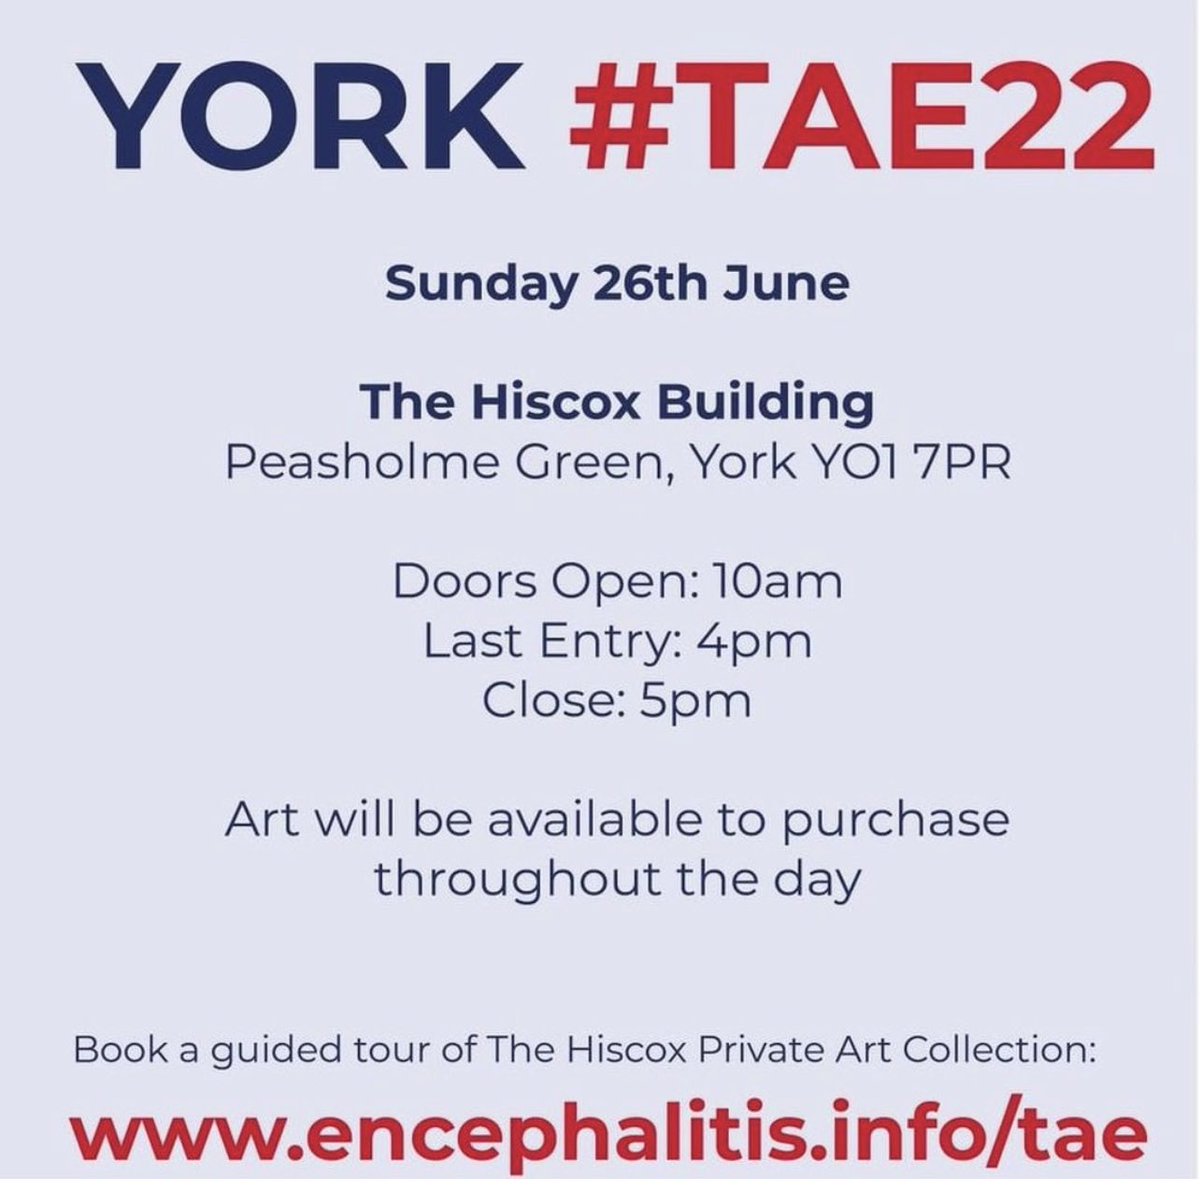 #TAE22 Gala Evening & Sale Saturday 25th June 5-8pm (by registration only). 

Sale continues Sunday 26th June (10-4). Open to all! Book to see the Hiscox private art collection too! (£15 all proceeds to @encephalitis) 

ALL cards £30 each! 

See you there! 

#YorkEvents #YorkArt